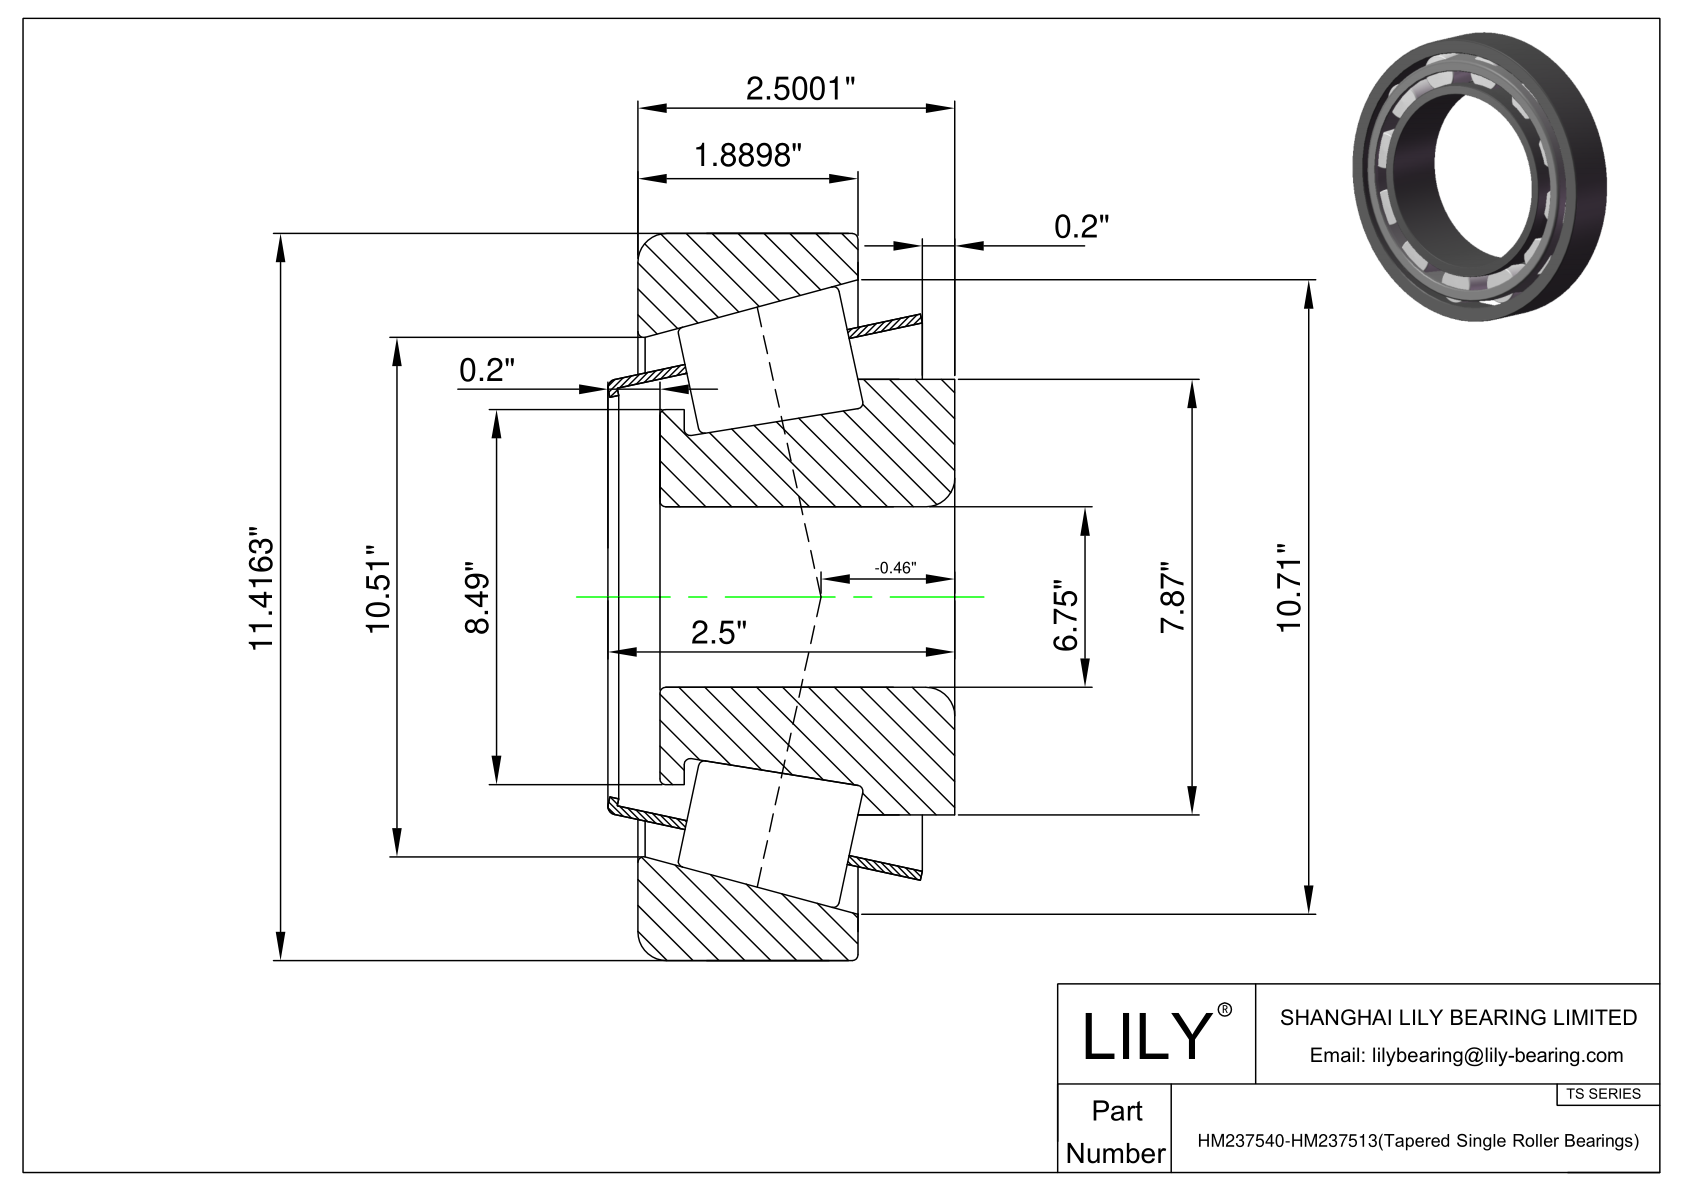 HM237540-HM237513 TS (Tapered Single Roller Bearings) (Imperial) cad drawing